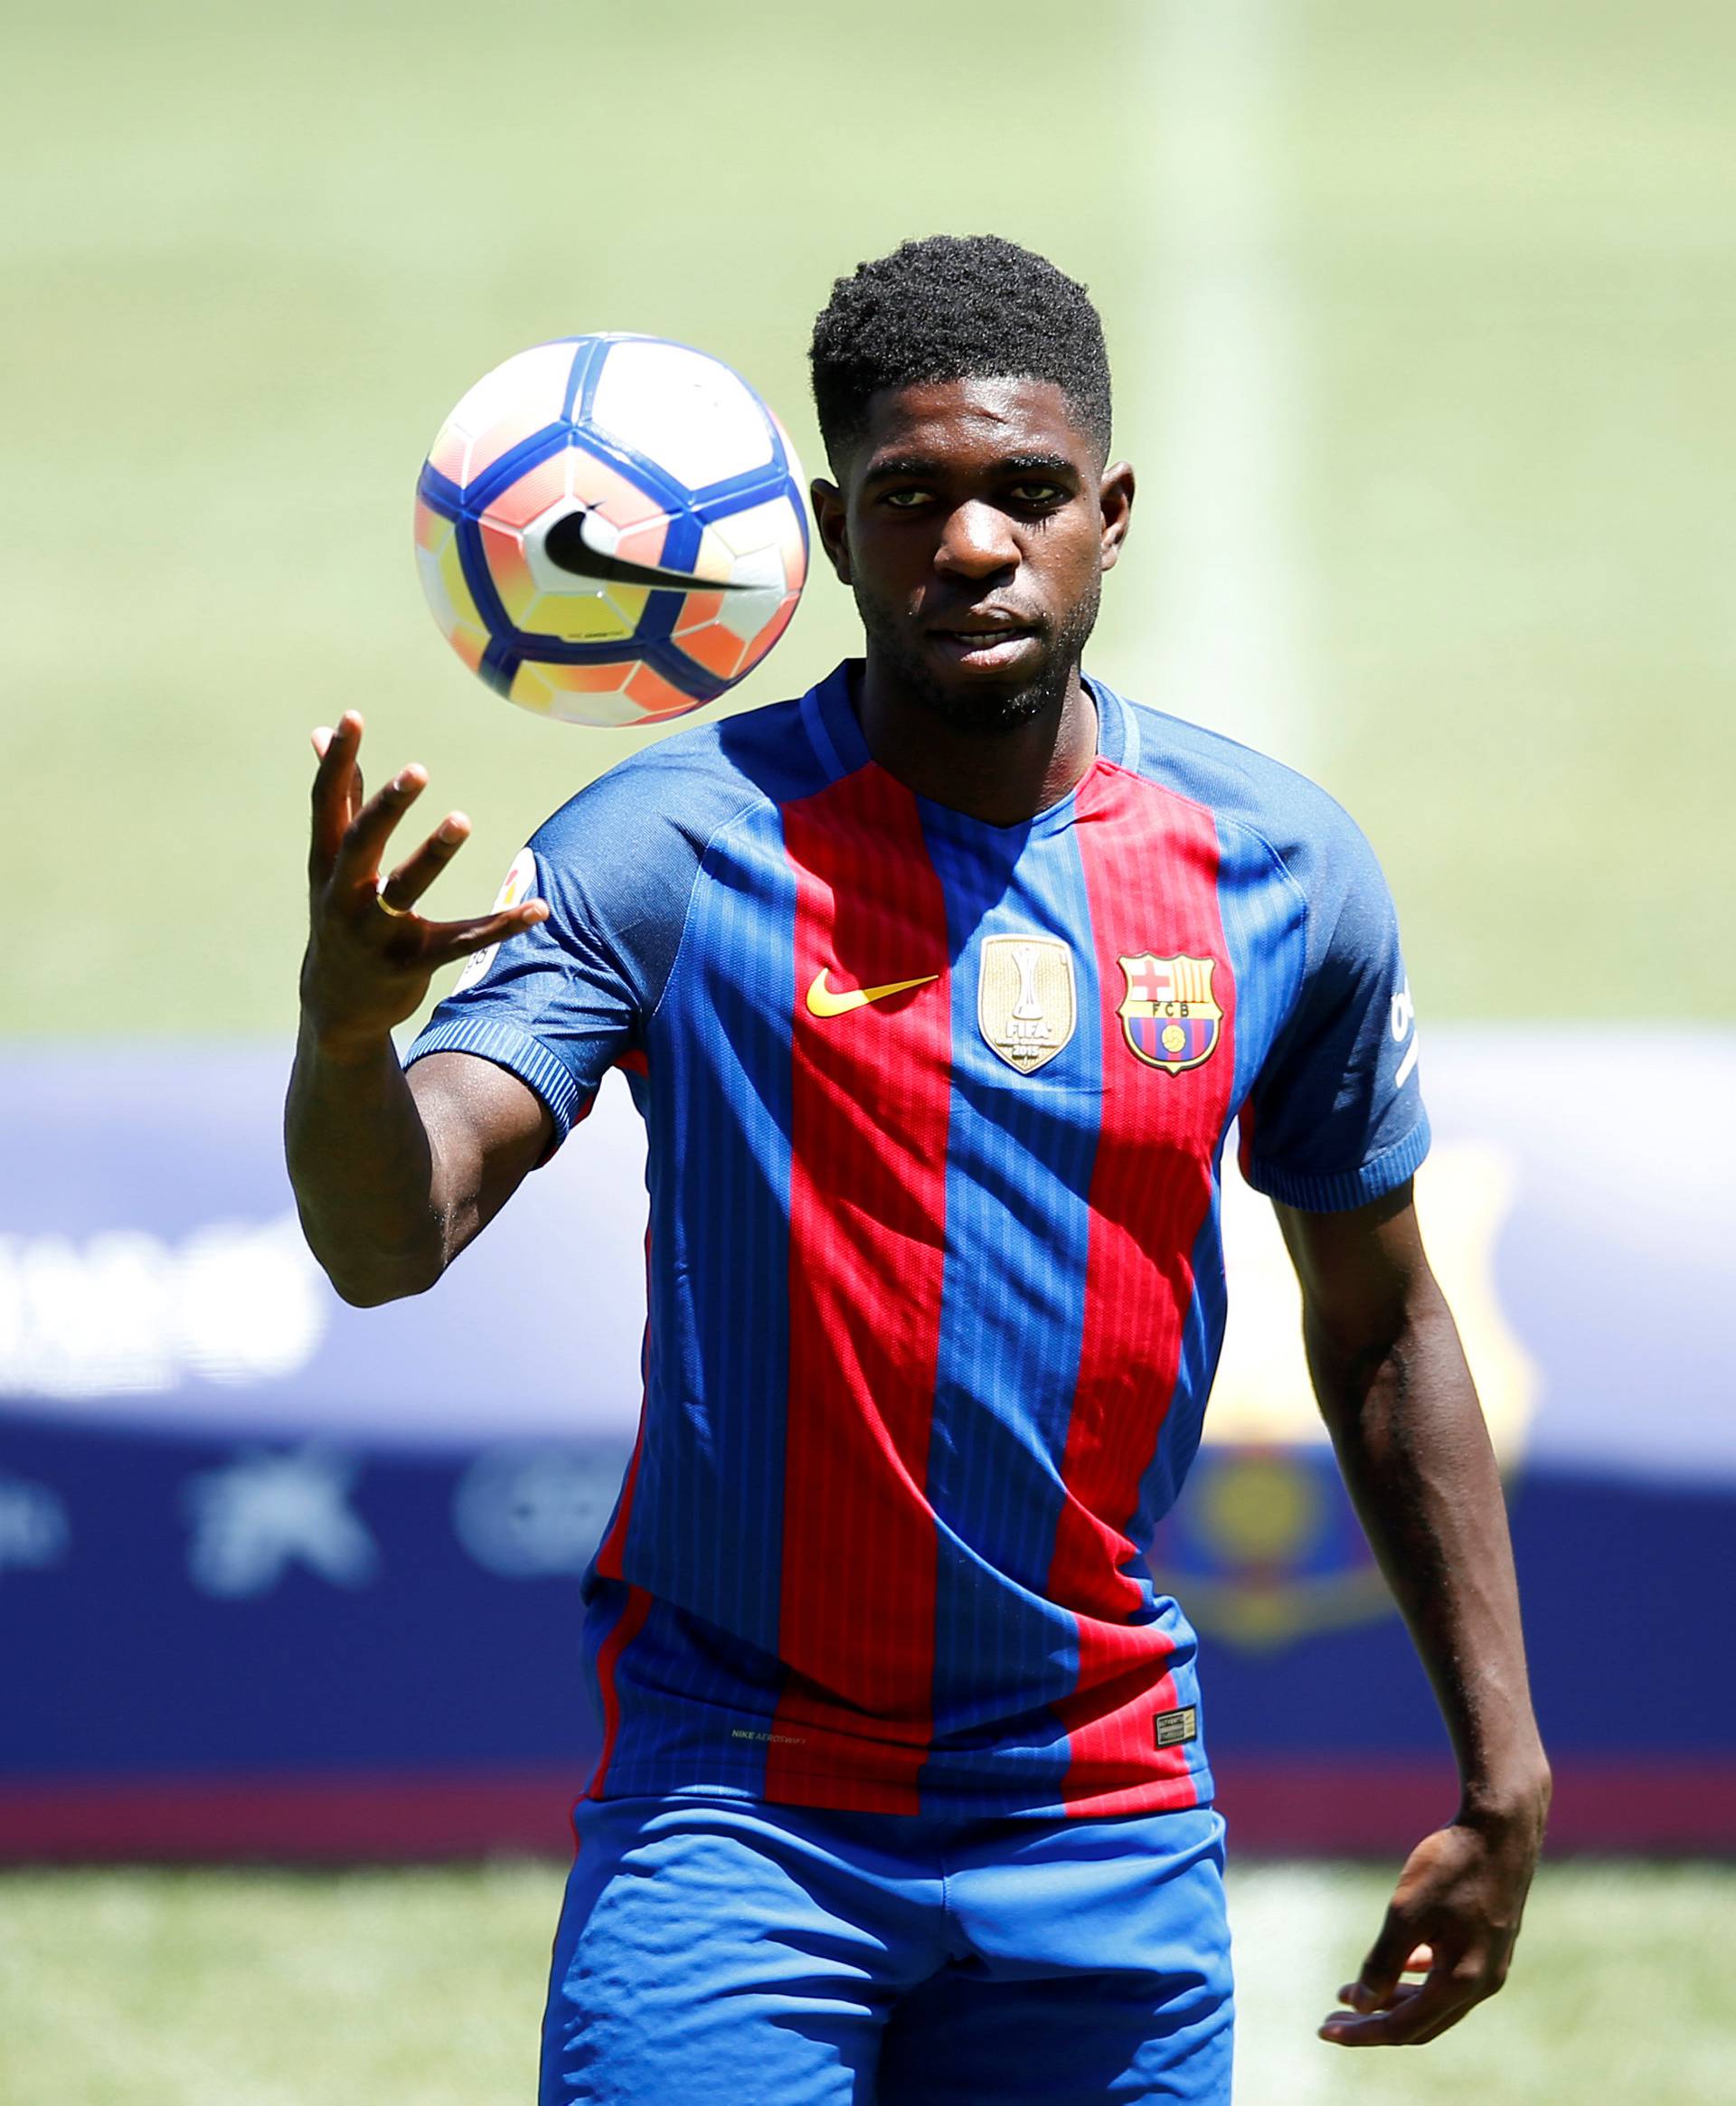 FC Barcelona's newly signed soccer player Samuel Umtiti plays wih a ball during his presentation at Camp Nou stadium in Barcelona